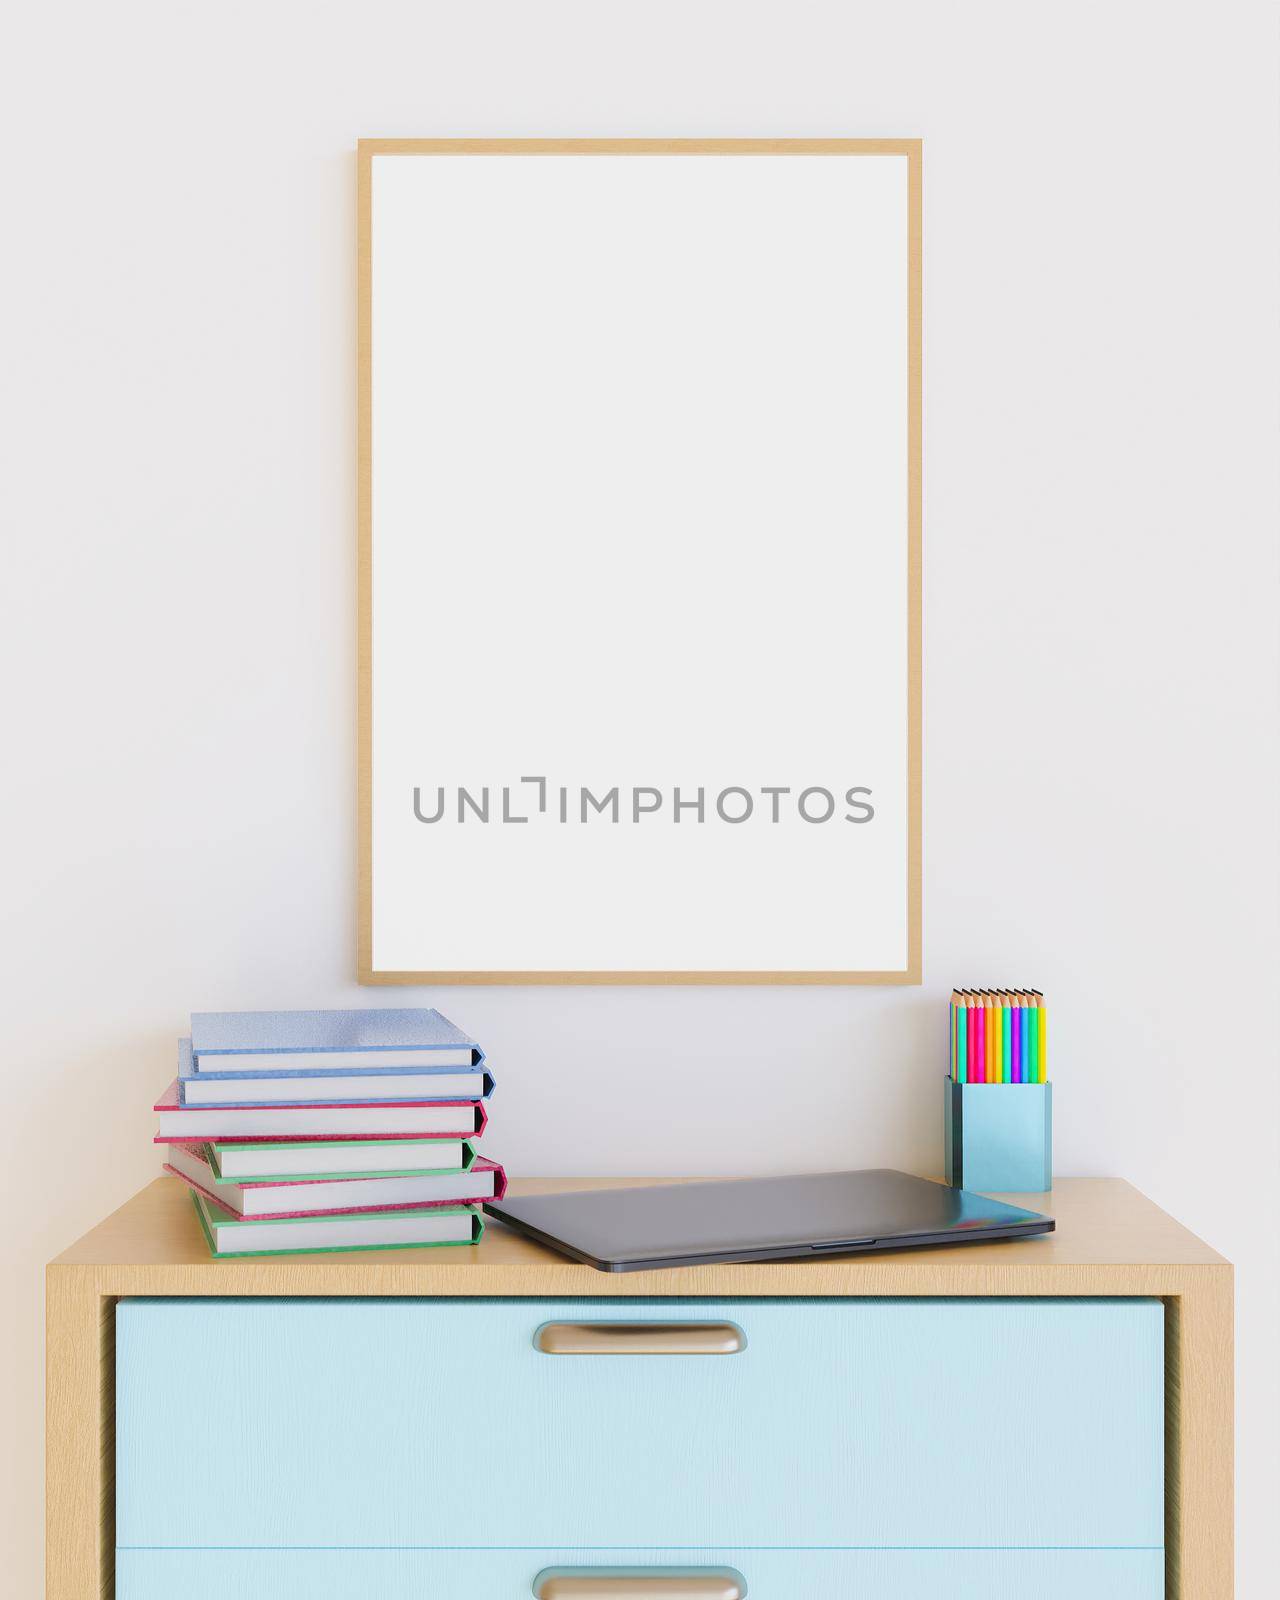 wooden frame on a furniture with laptop, books and pencils on top by asolano